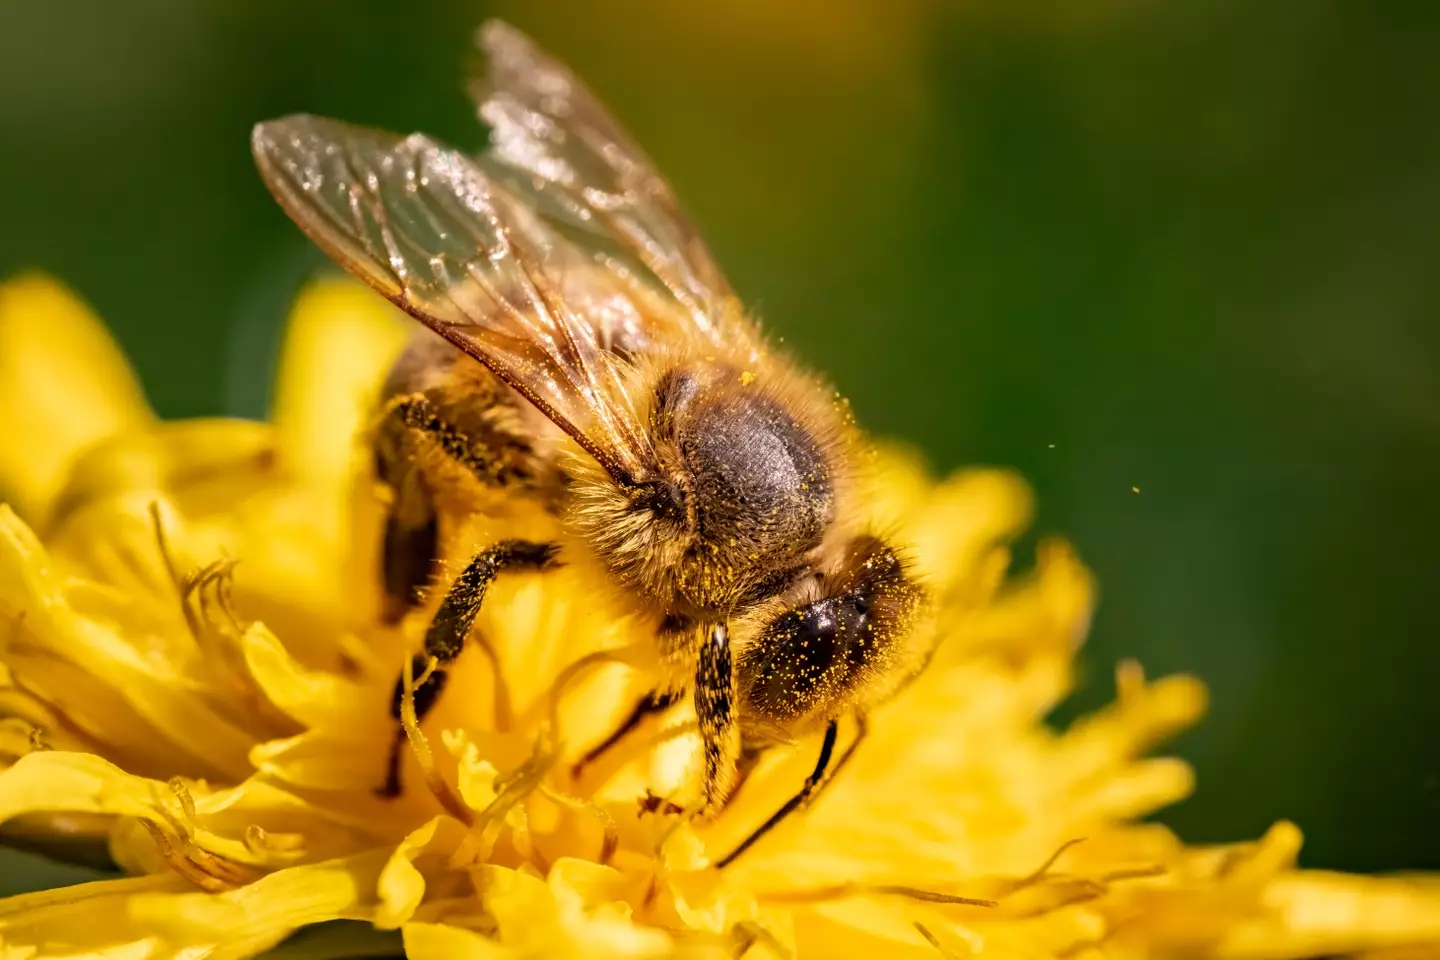 They are particularly harmful to honeybees.